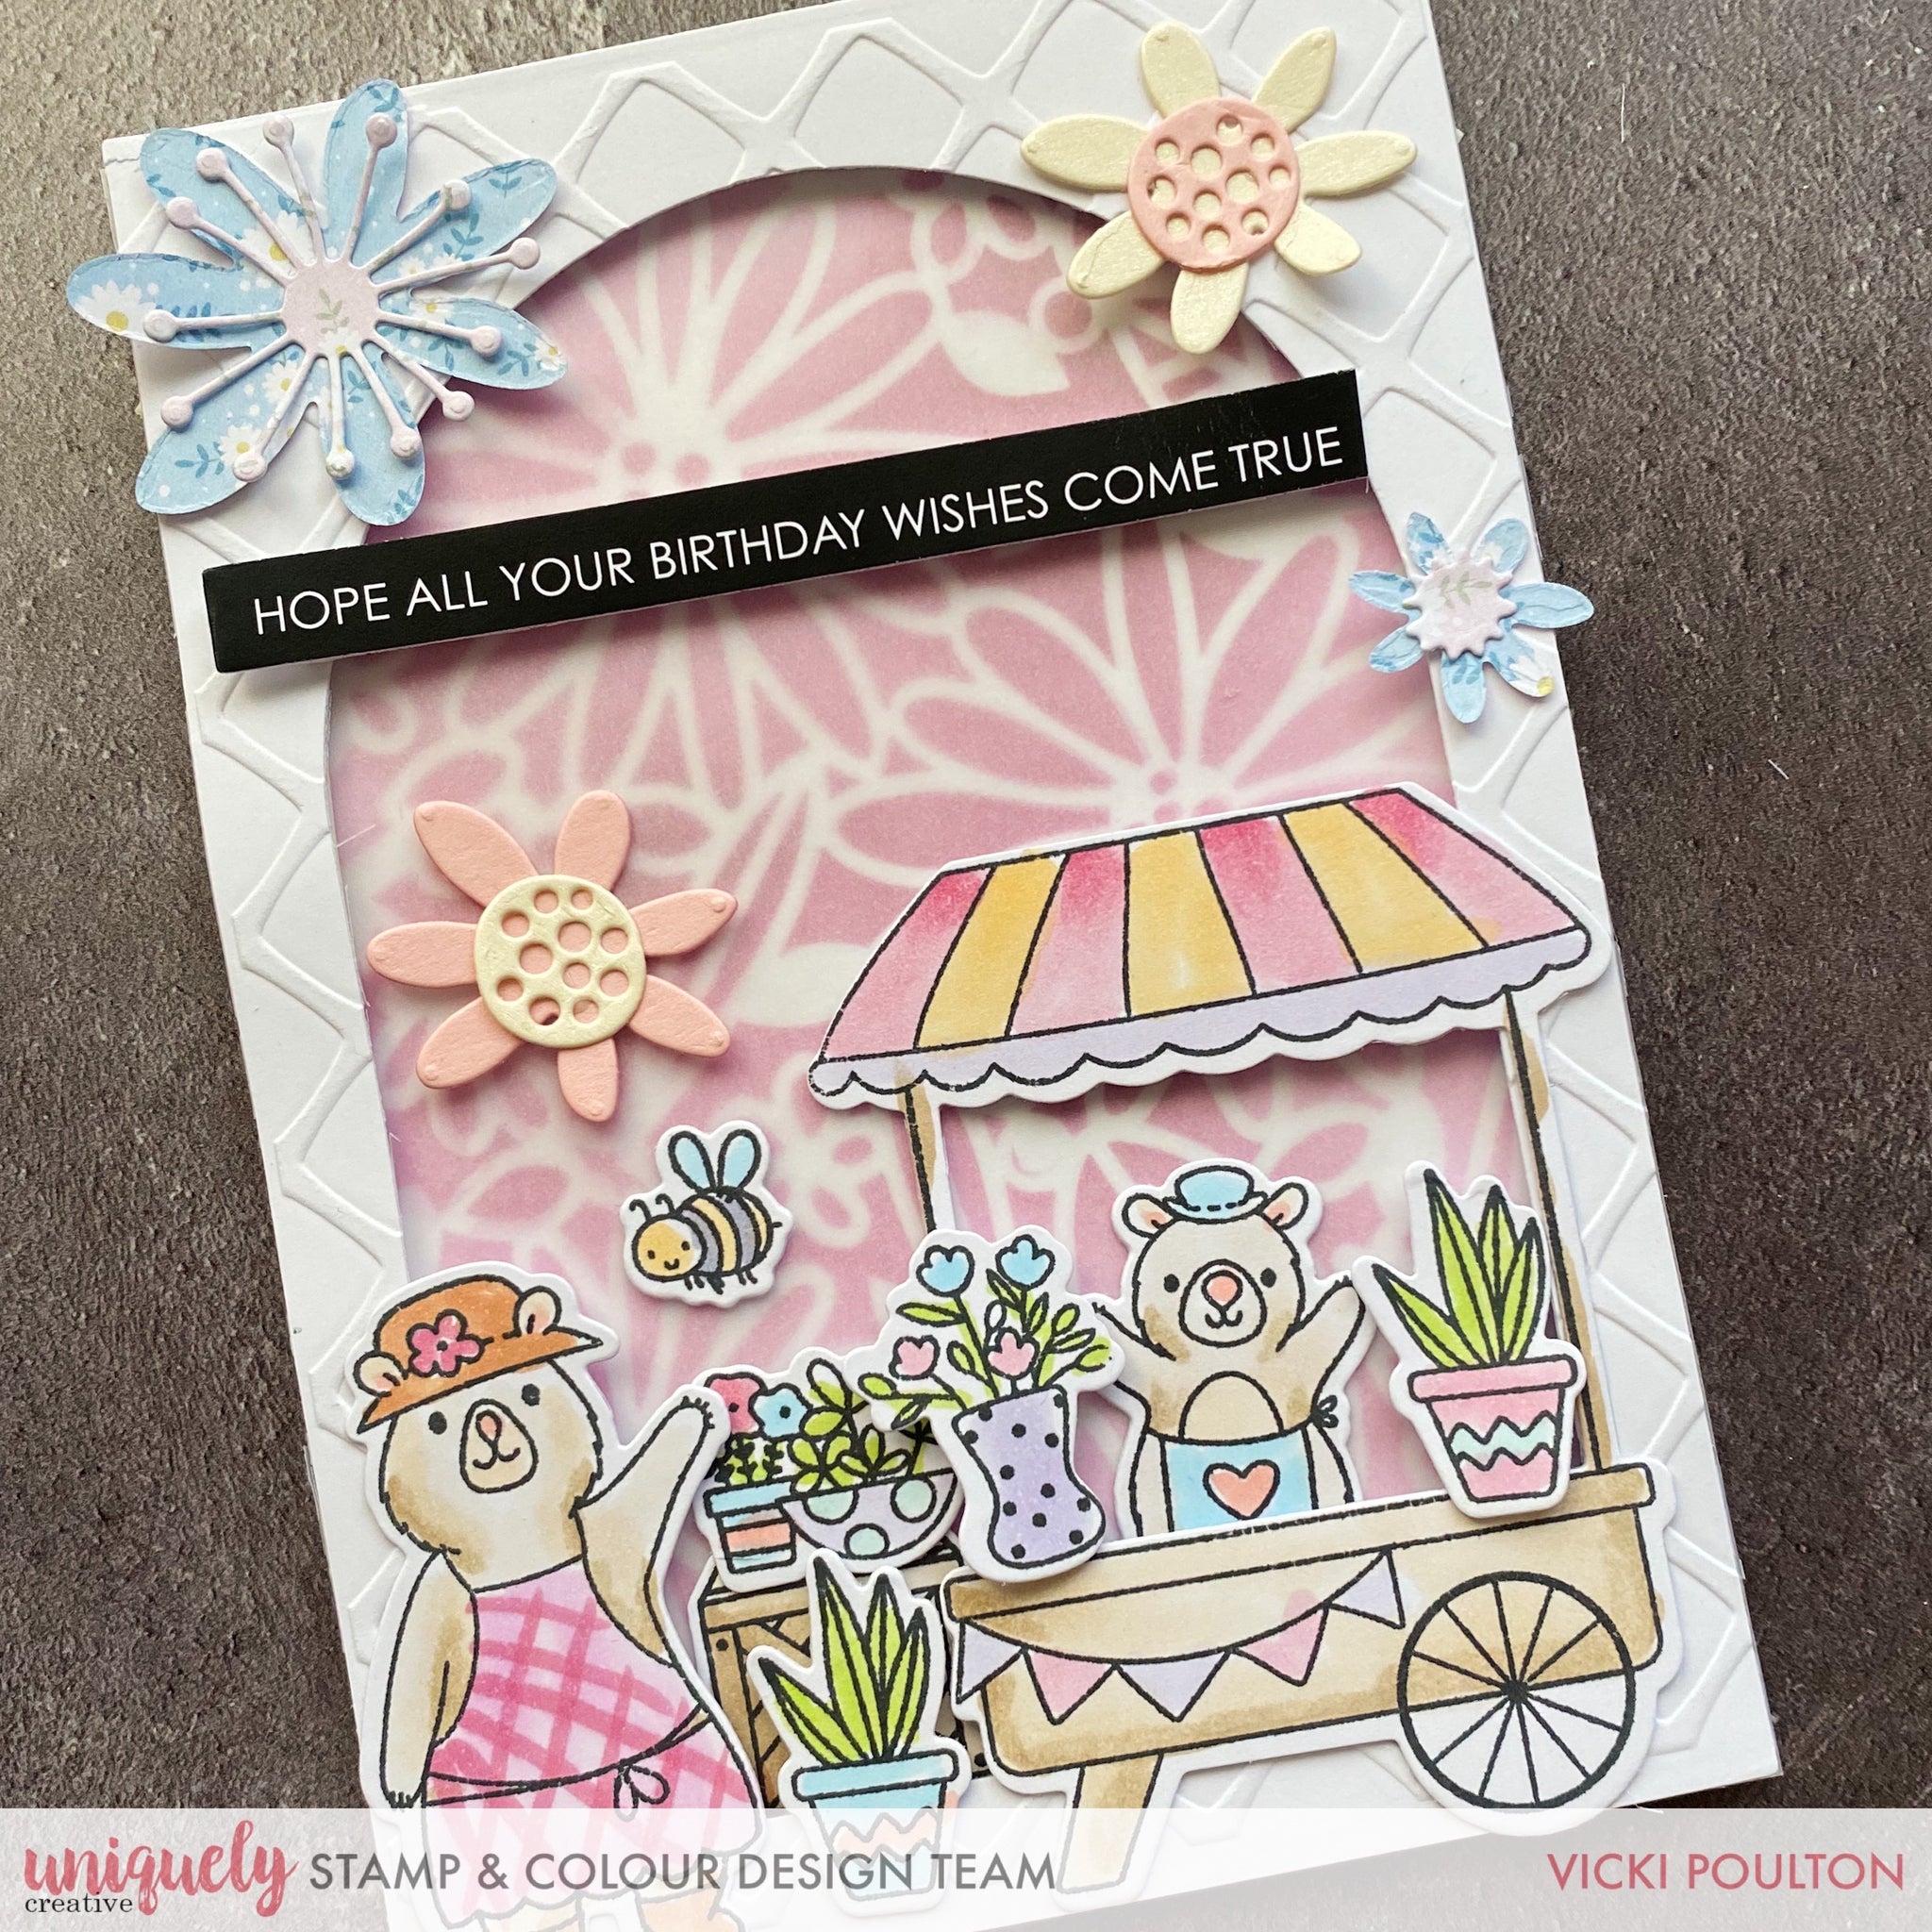 Crafting inspiration from Vicky at Crafting Clare's Paper Moments: Amazing  Birthday tags with half price Stampin' Up tag punch!